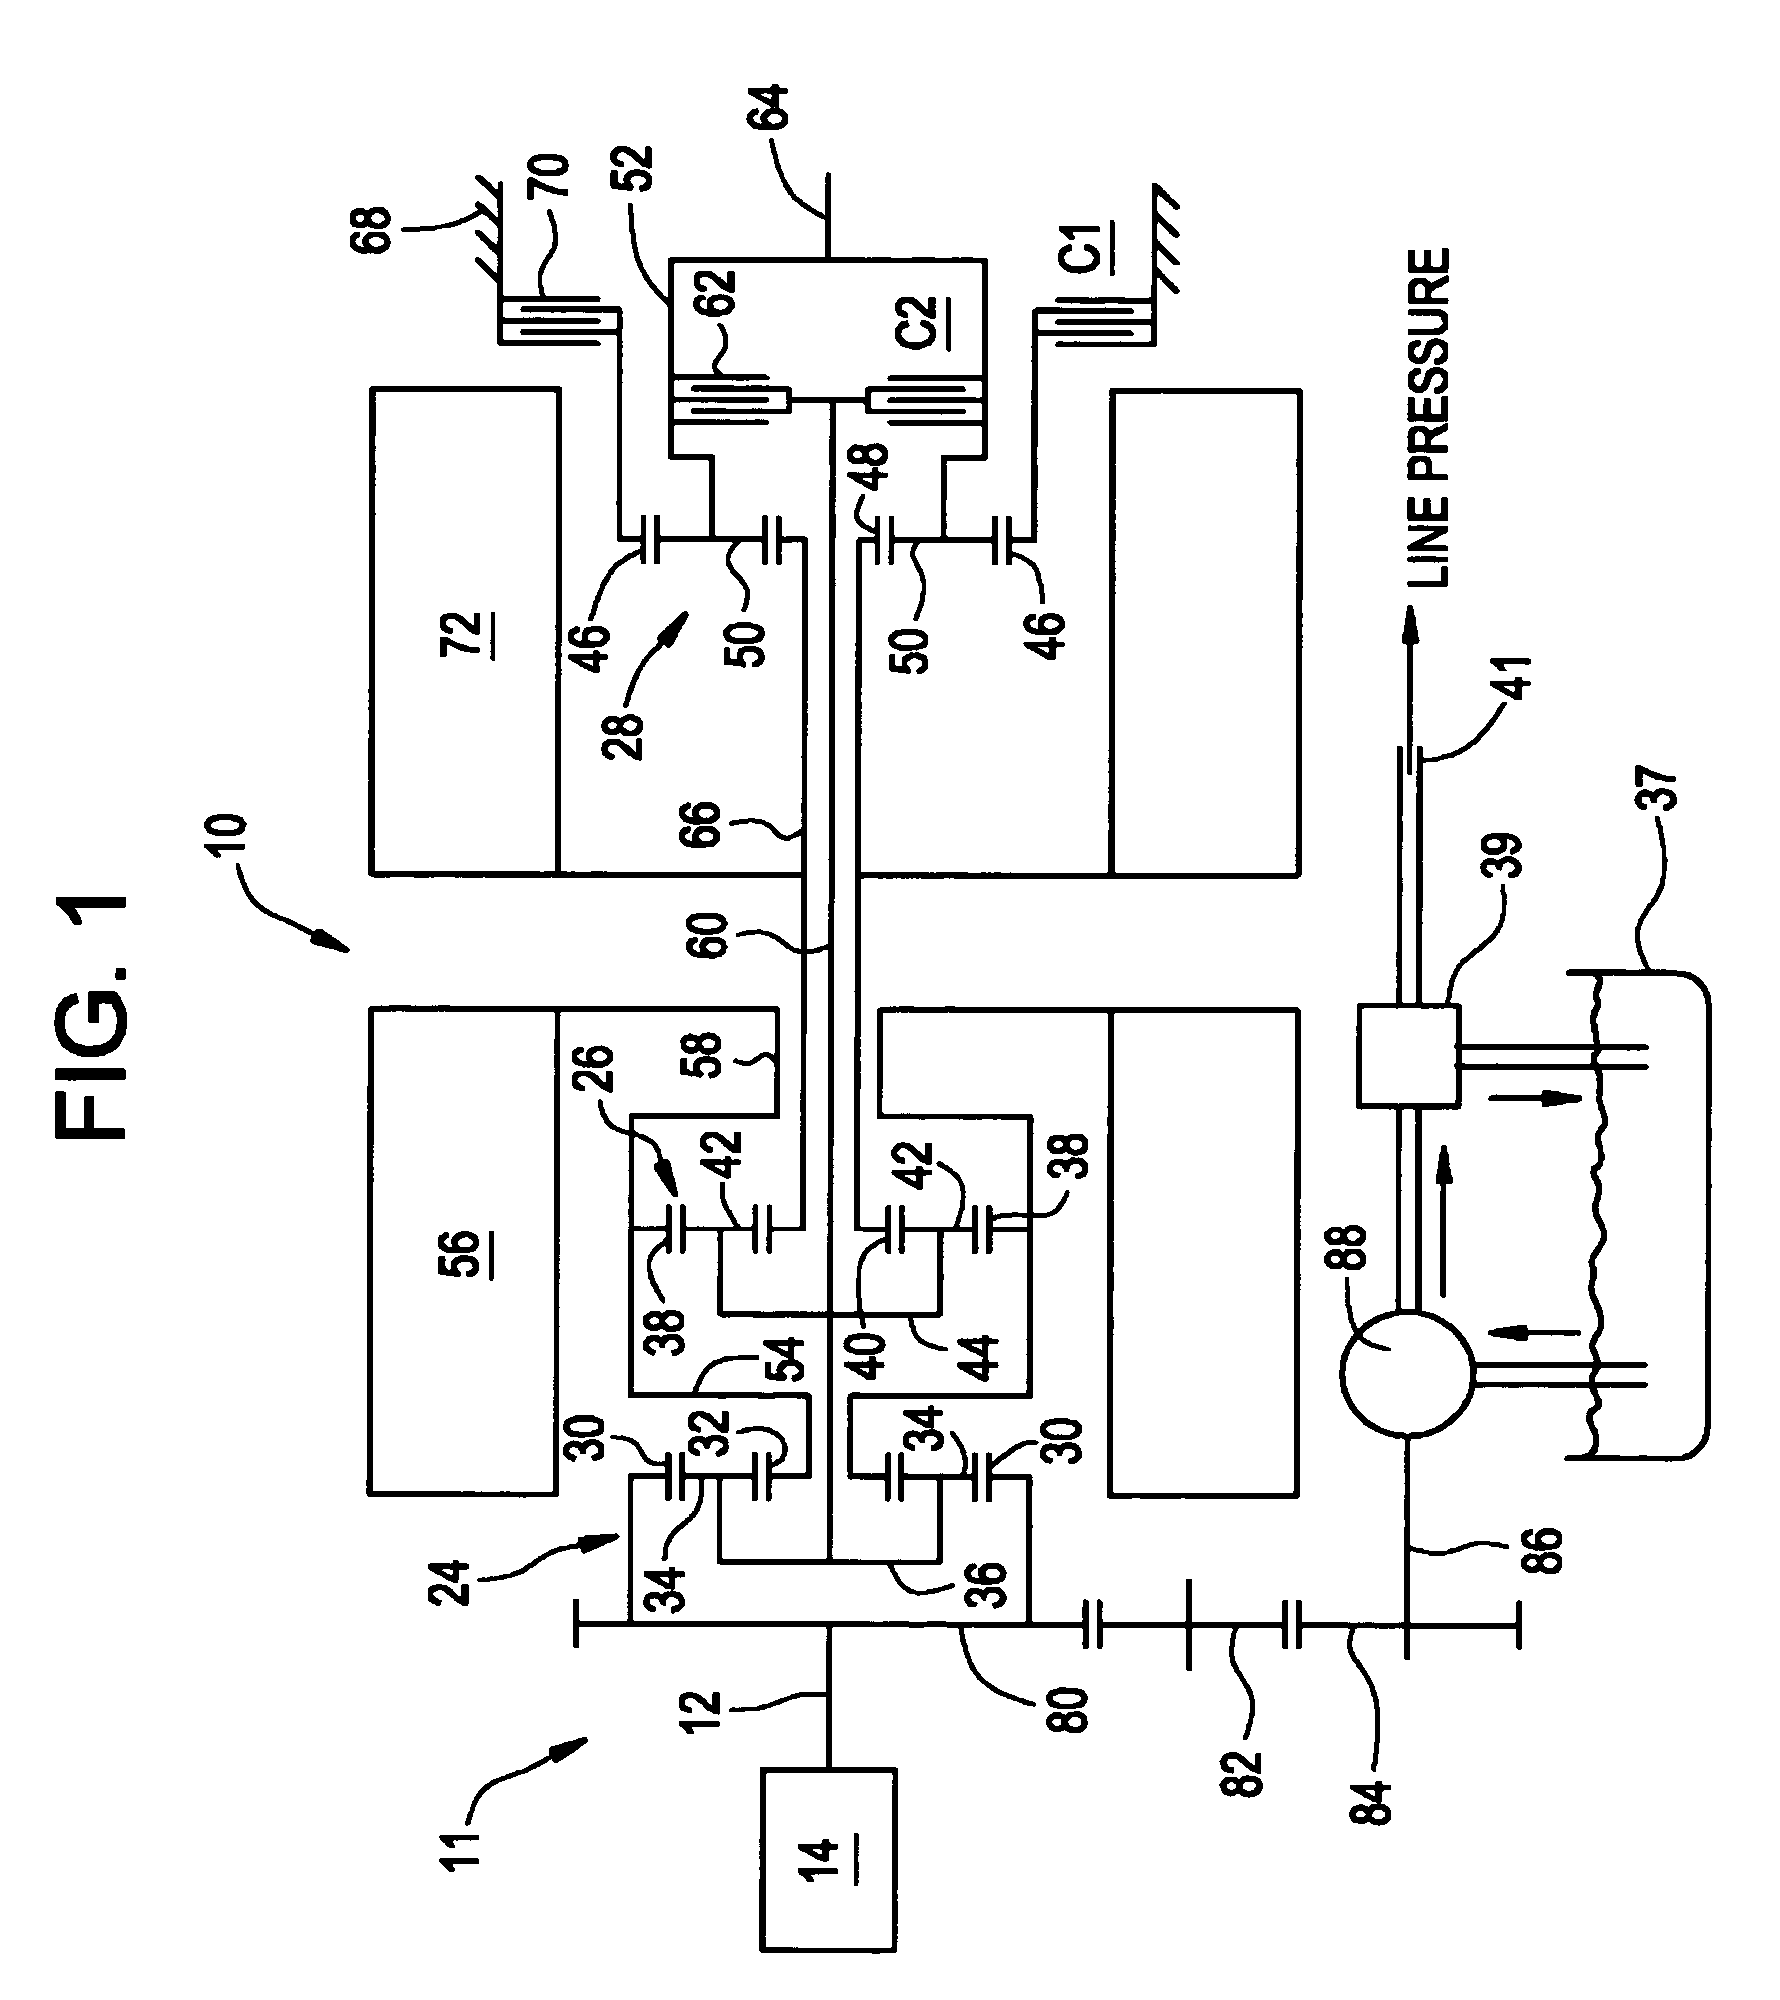 Energy storage system state of charge diagnostic